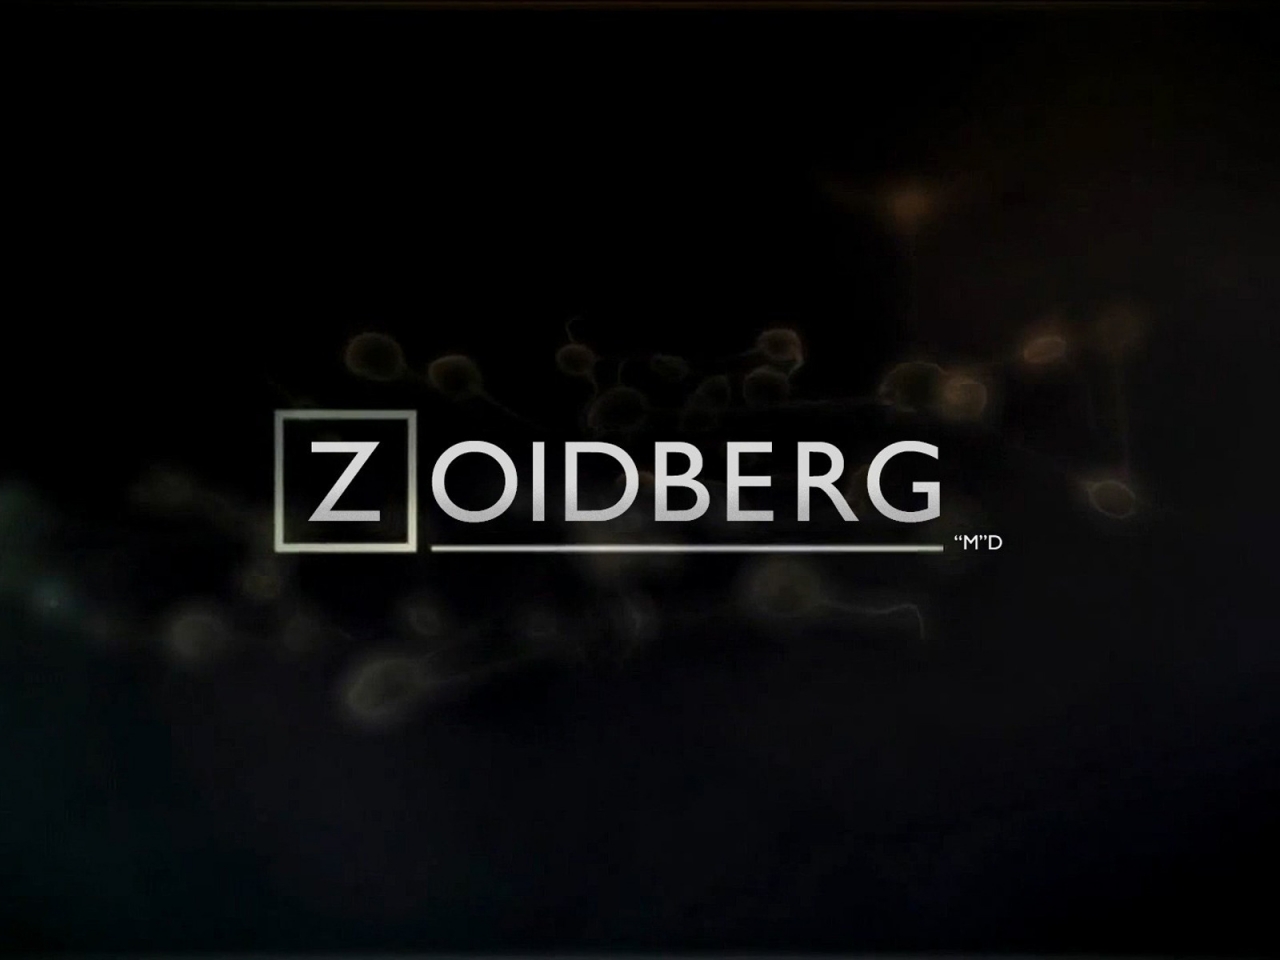 Zoidberg MD for 1280 x 960 resolution